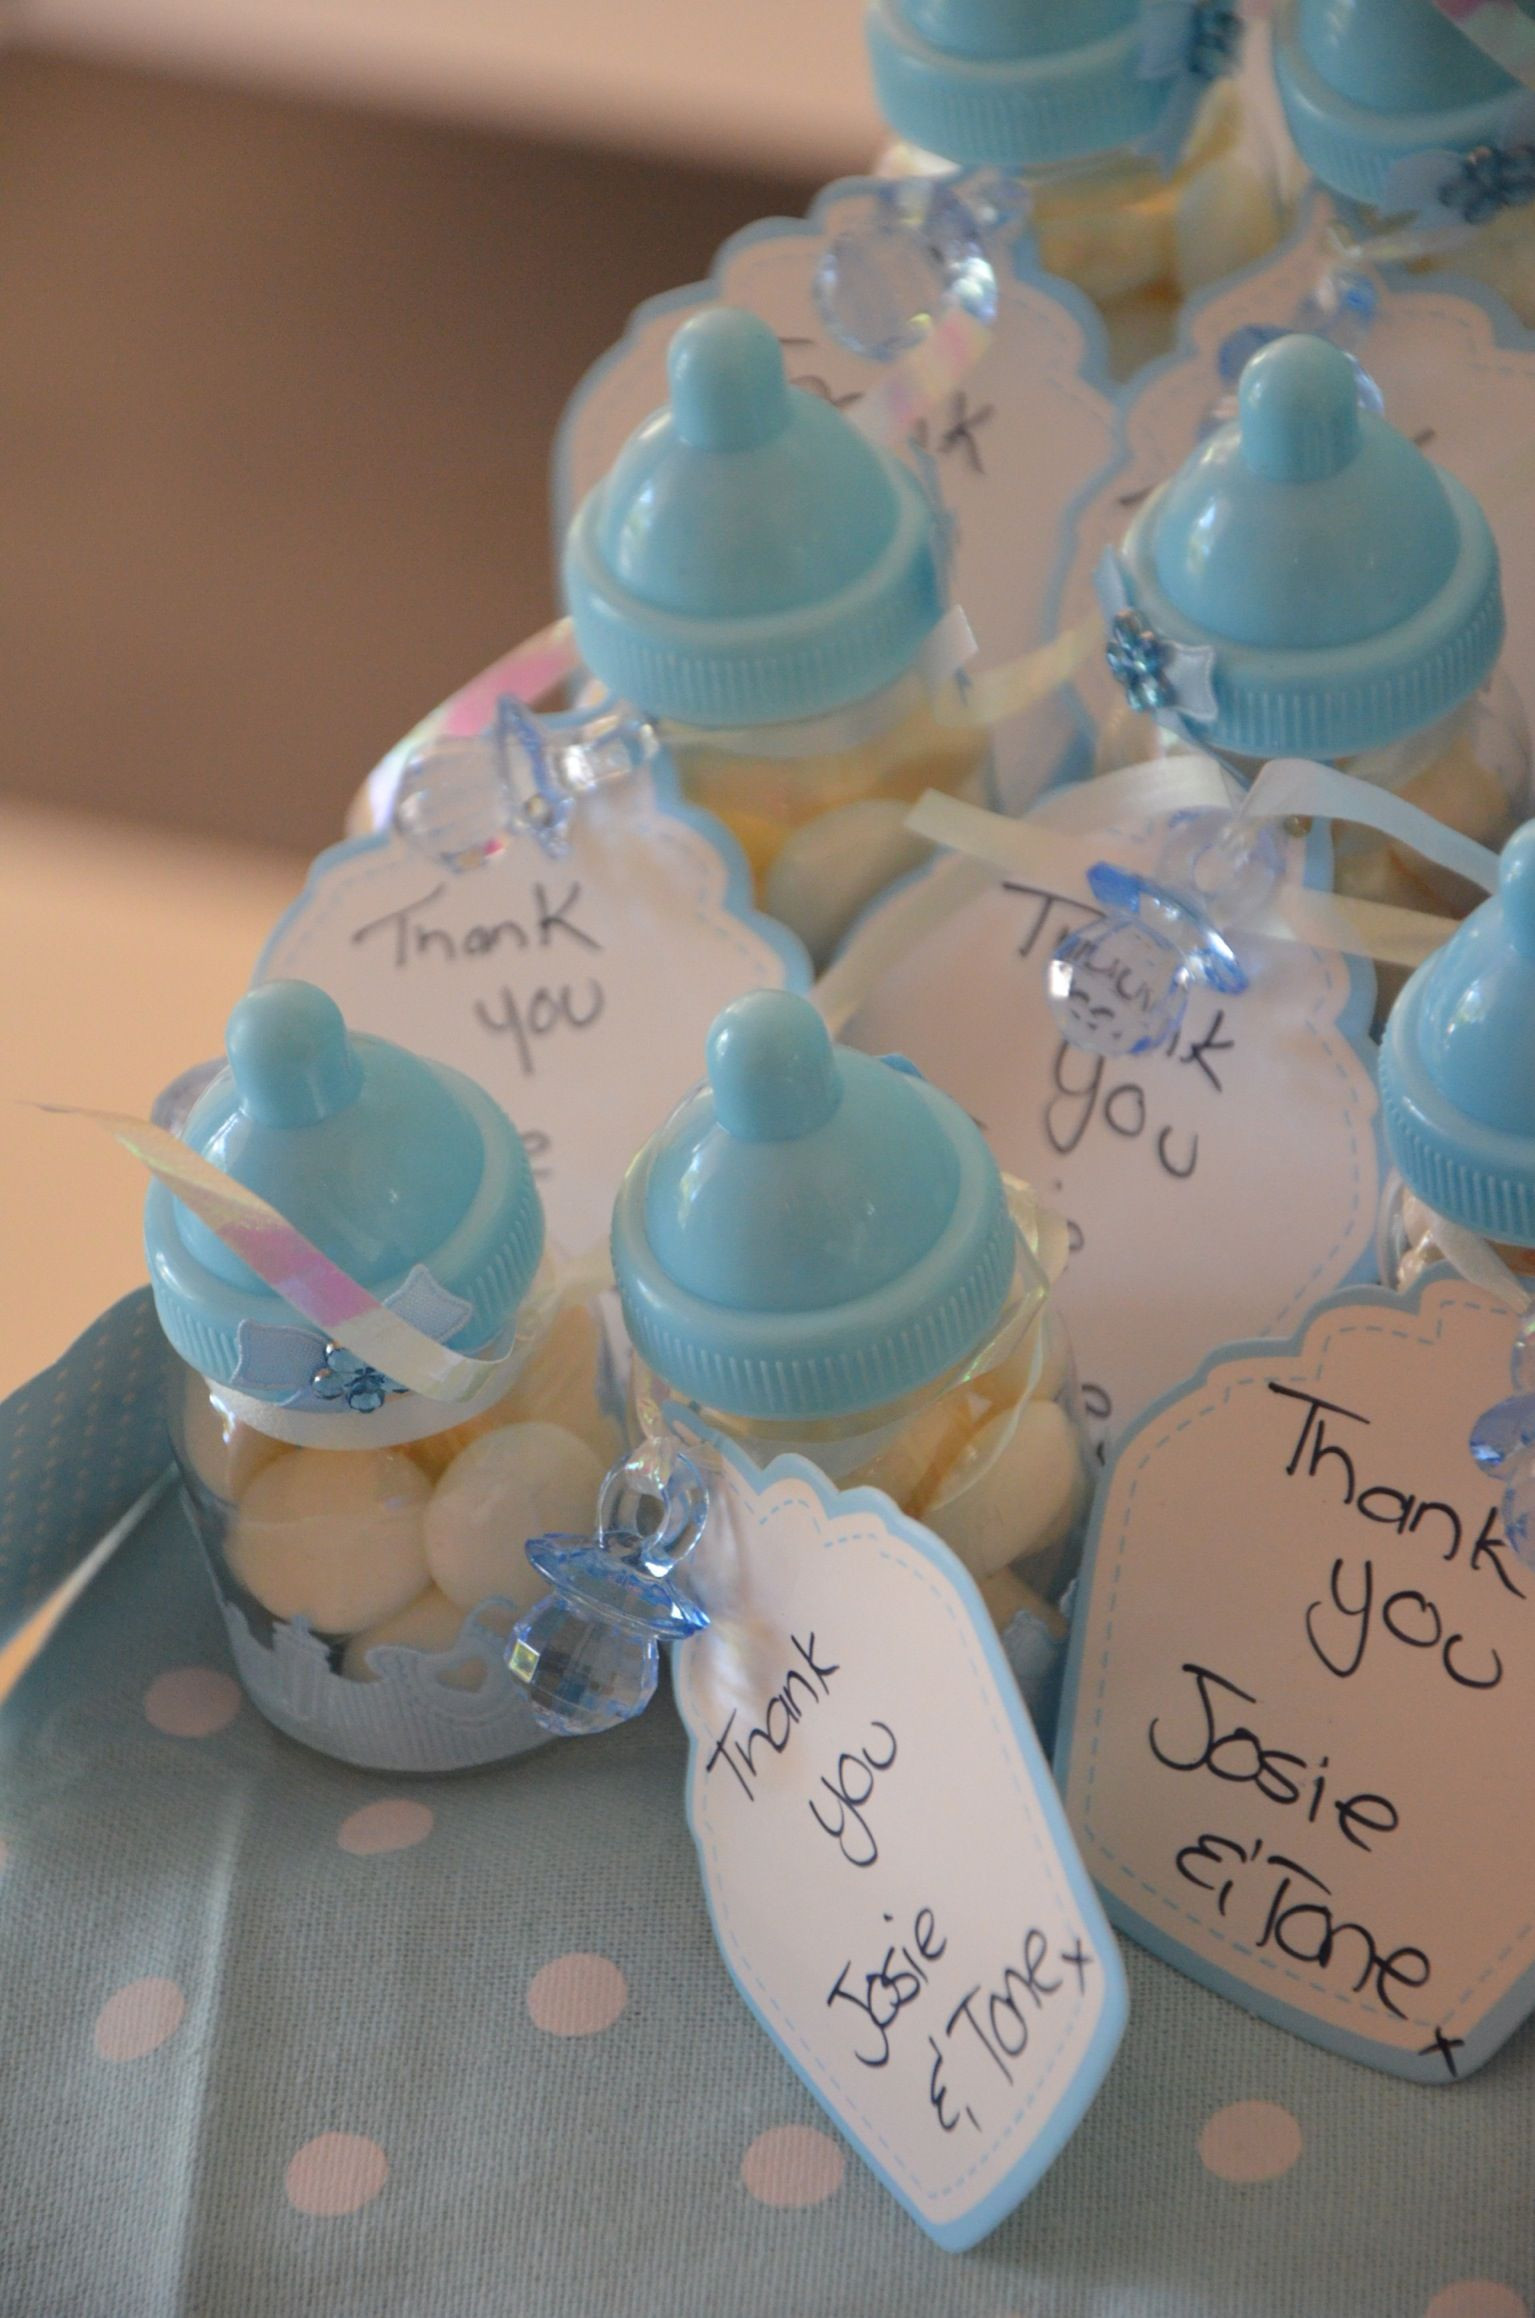 Thank You Gift Ideas For Baby Shower Guests
 Thank you t for guests